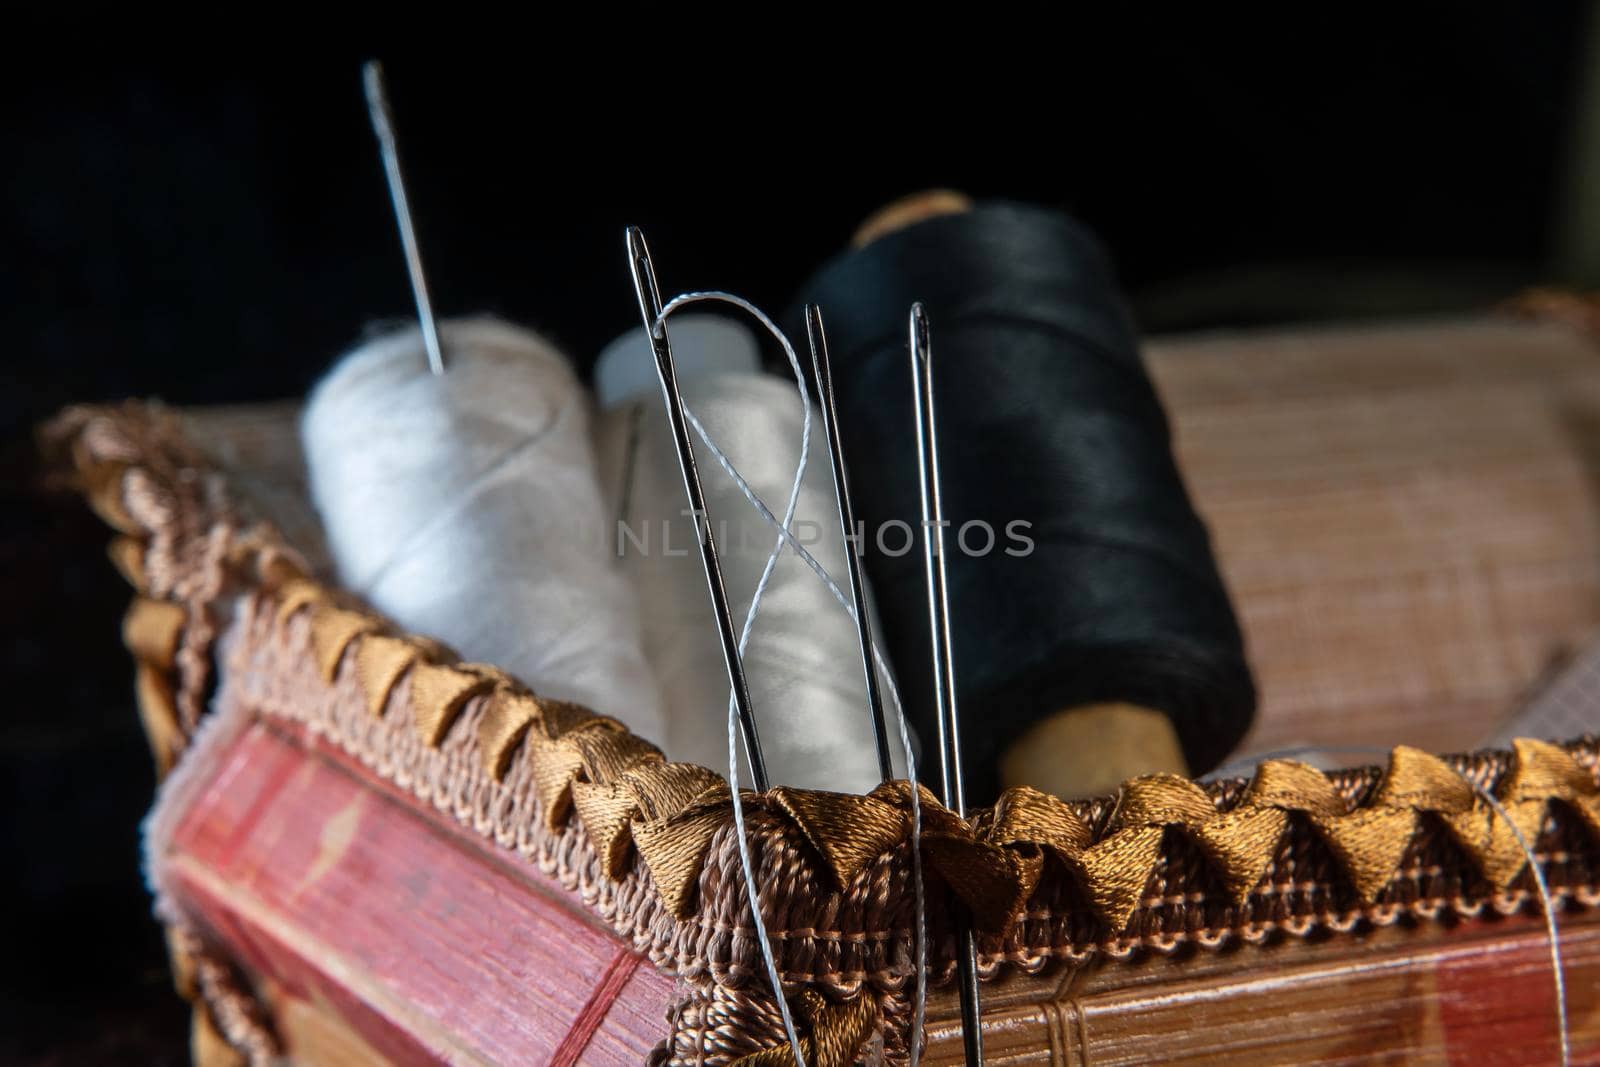 The thread is threaded through the eye of a sewing needle.Sewing and needlework classes.Workshop of hand craft and handmade.Workplace of the textile industry.The embroidery needle is stuck in a bobbin